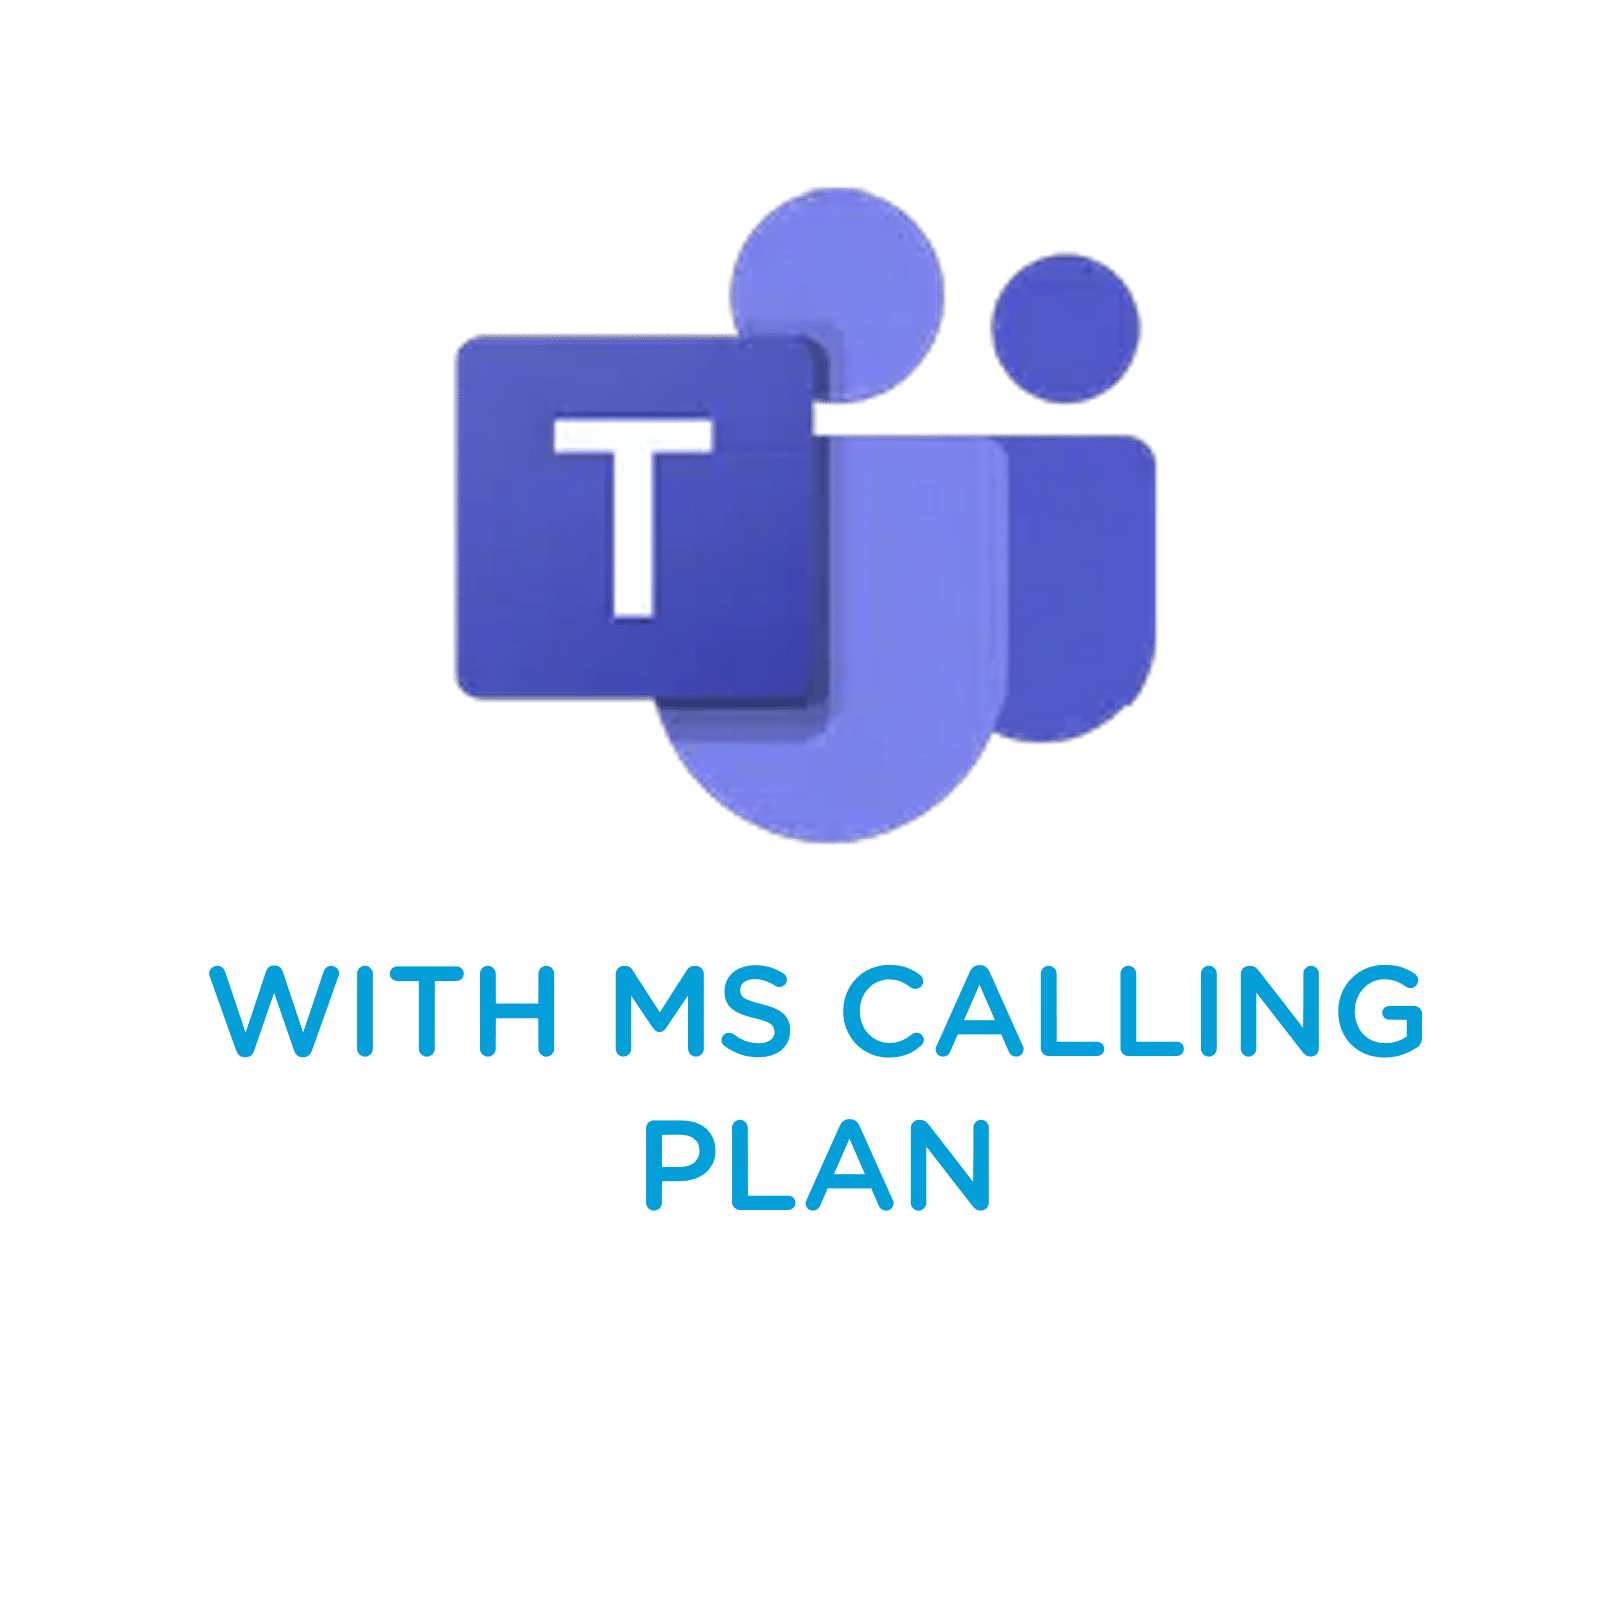 Microsoft Teams with Calling Plans